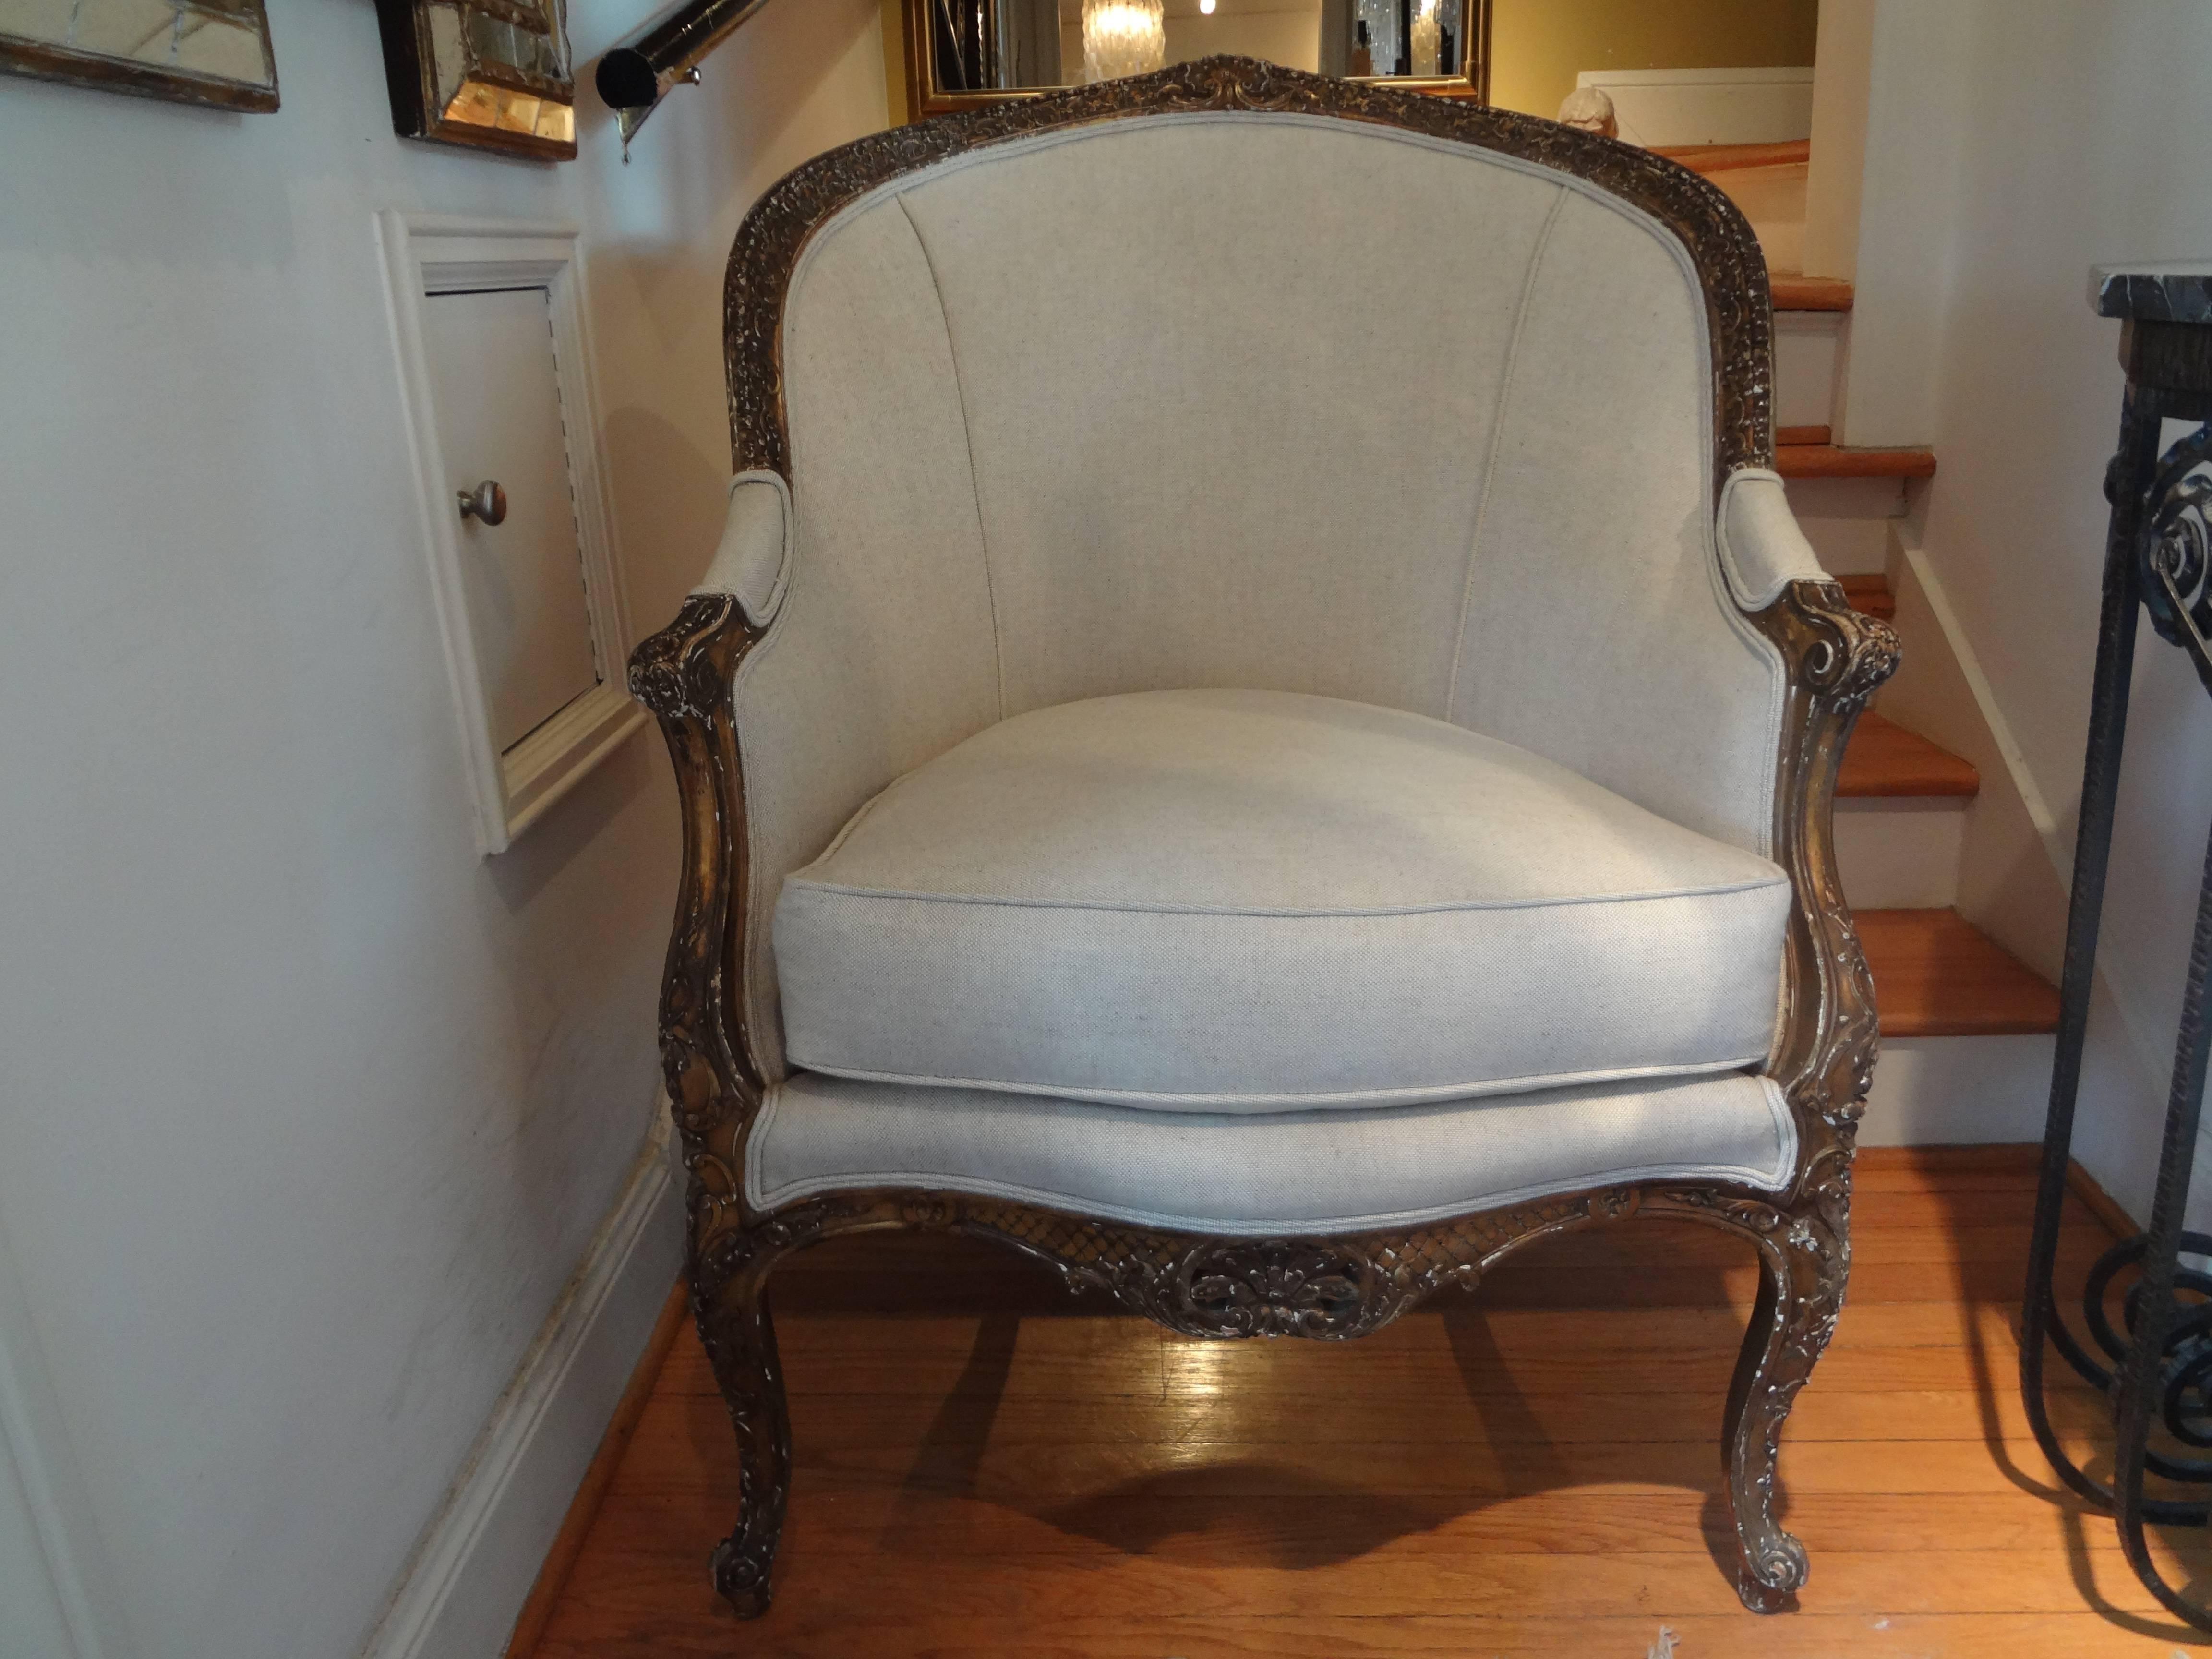 19th century French Regence style giltwood bergère.
Beautifully detailed and comfortable antique French Regence style gilt wood bergère chair newly upholstered in oatmeal linen. This stunning French Regence style giltwood bergère has a beautiful